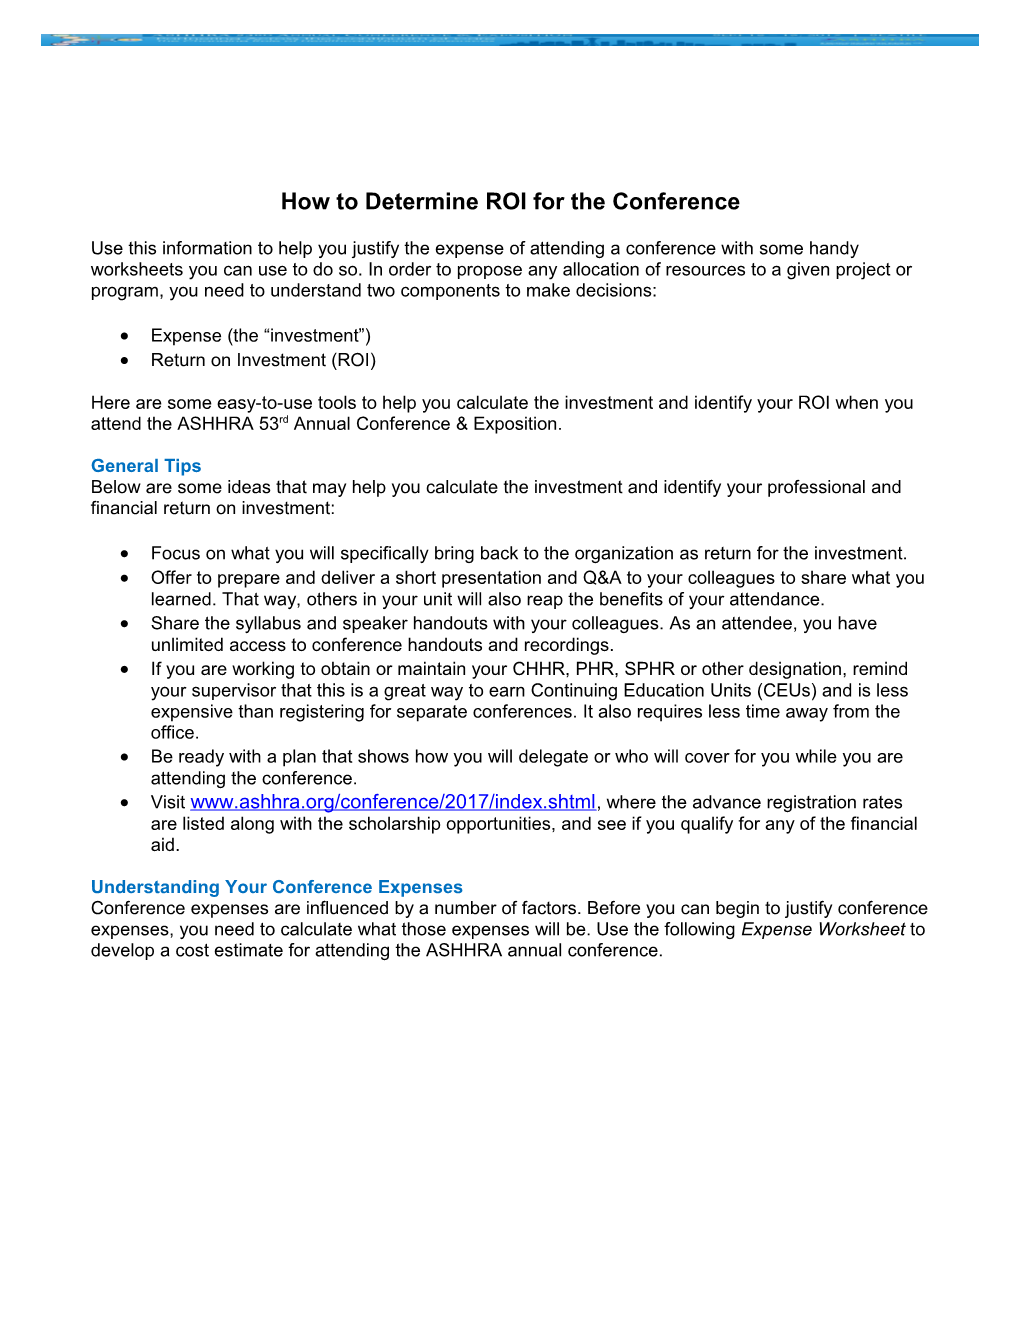 How to Determineroifor the Conference